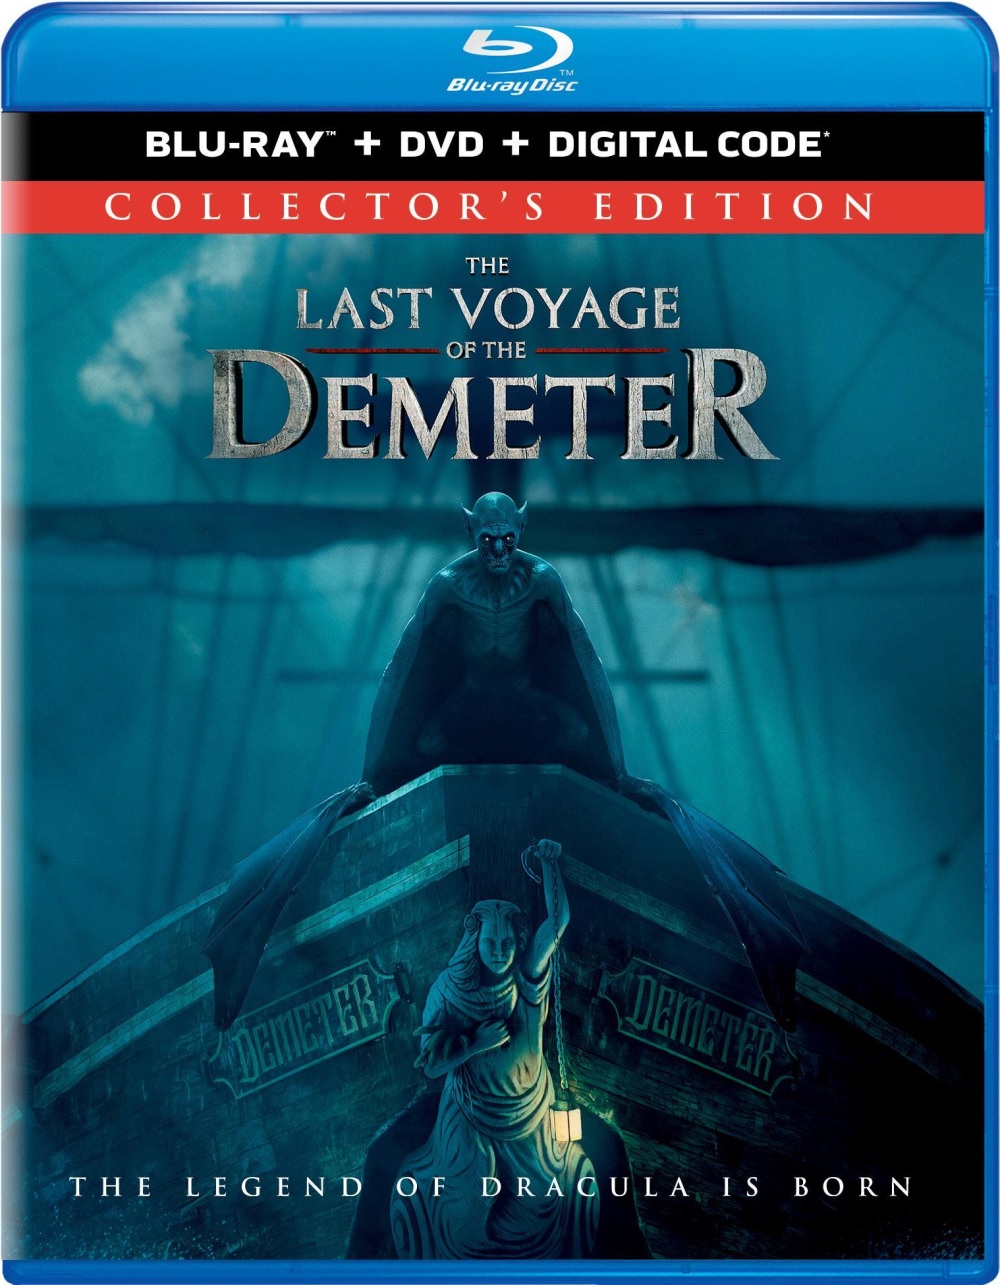 What Is The Last Voyage Of The Demeter Based On?